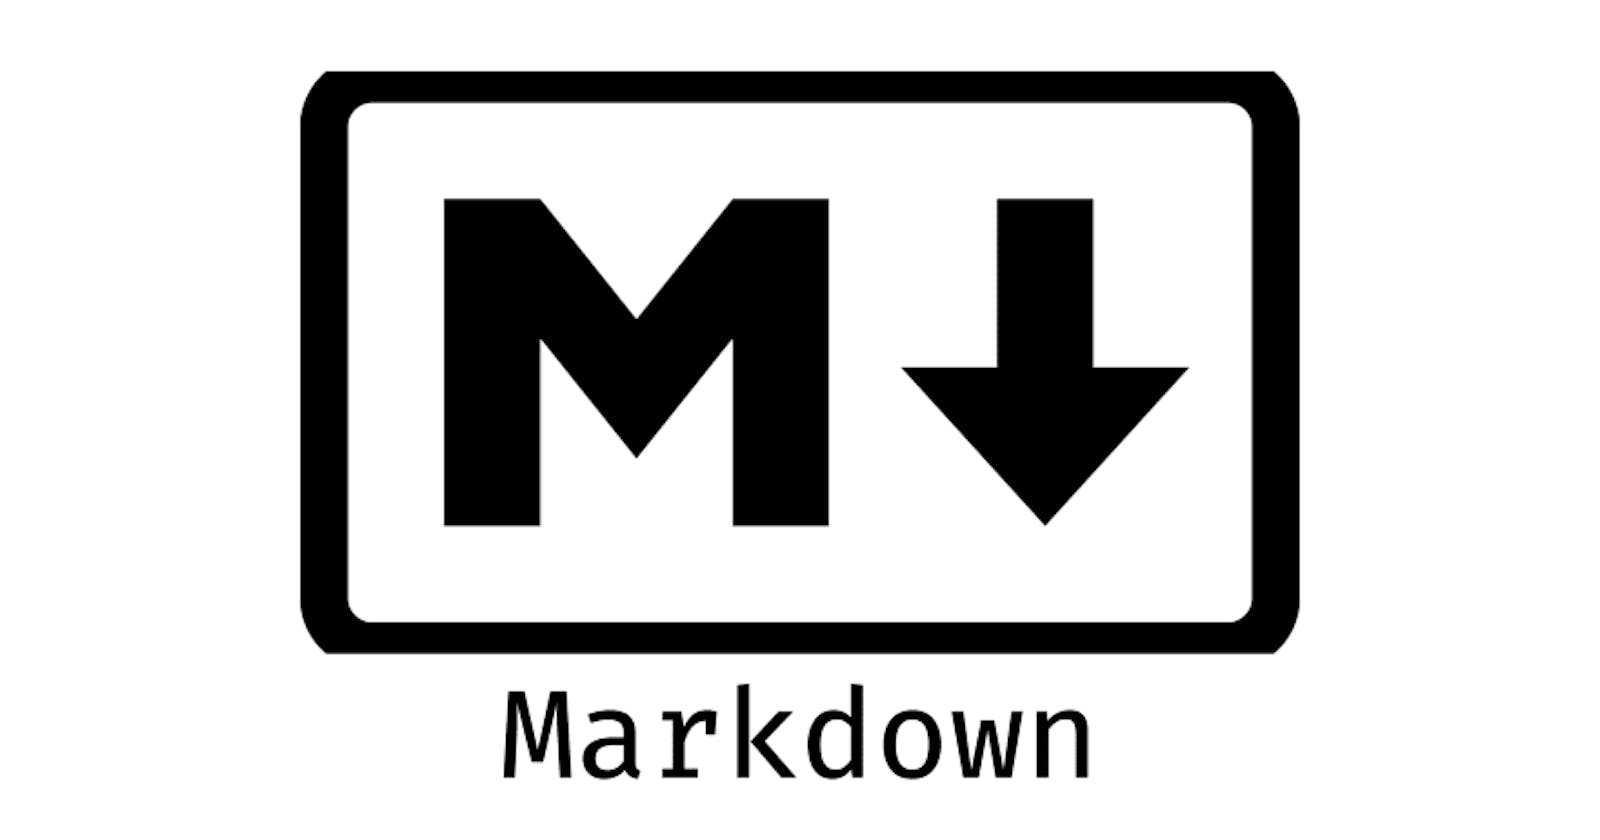 Github Markdown Syntax Guide